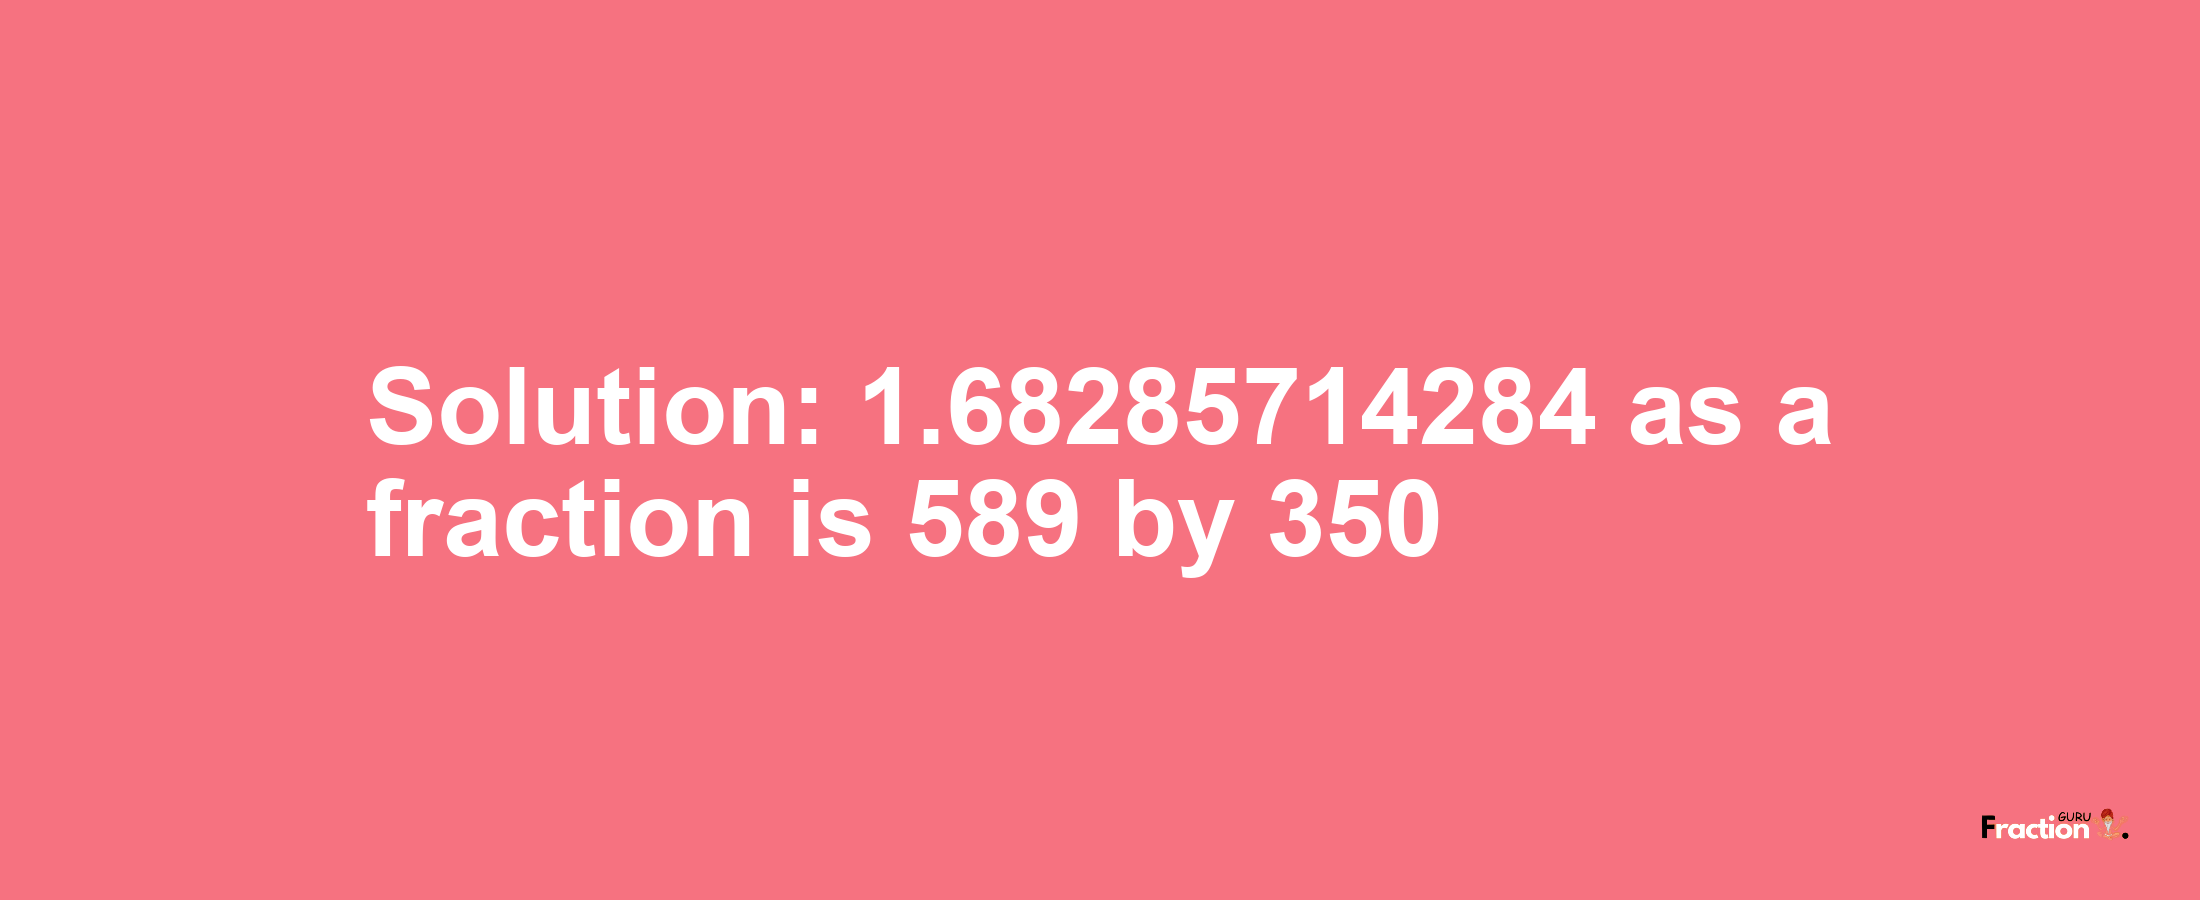 Solution:1.68285714284 as a fraction is 589/350